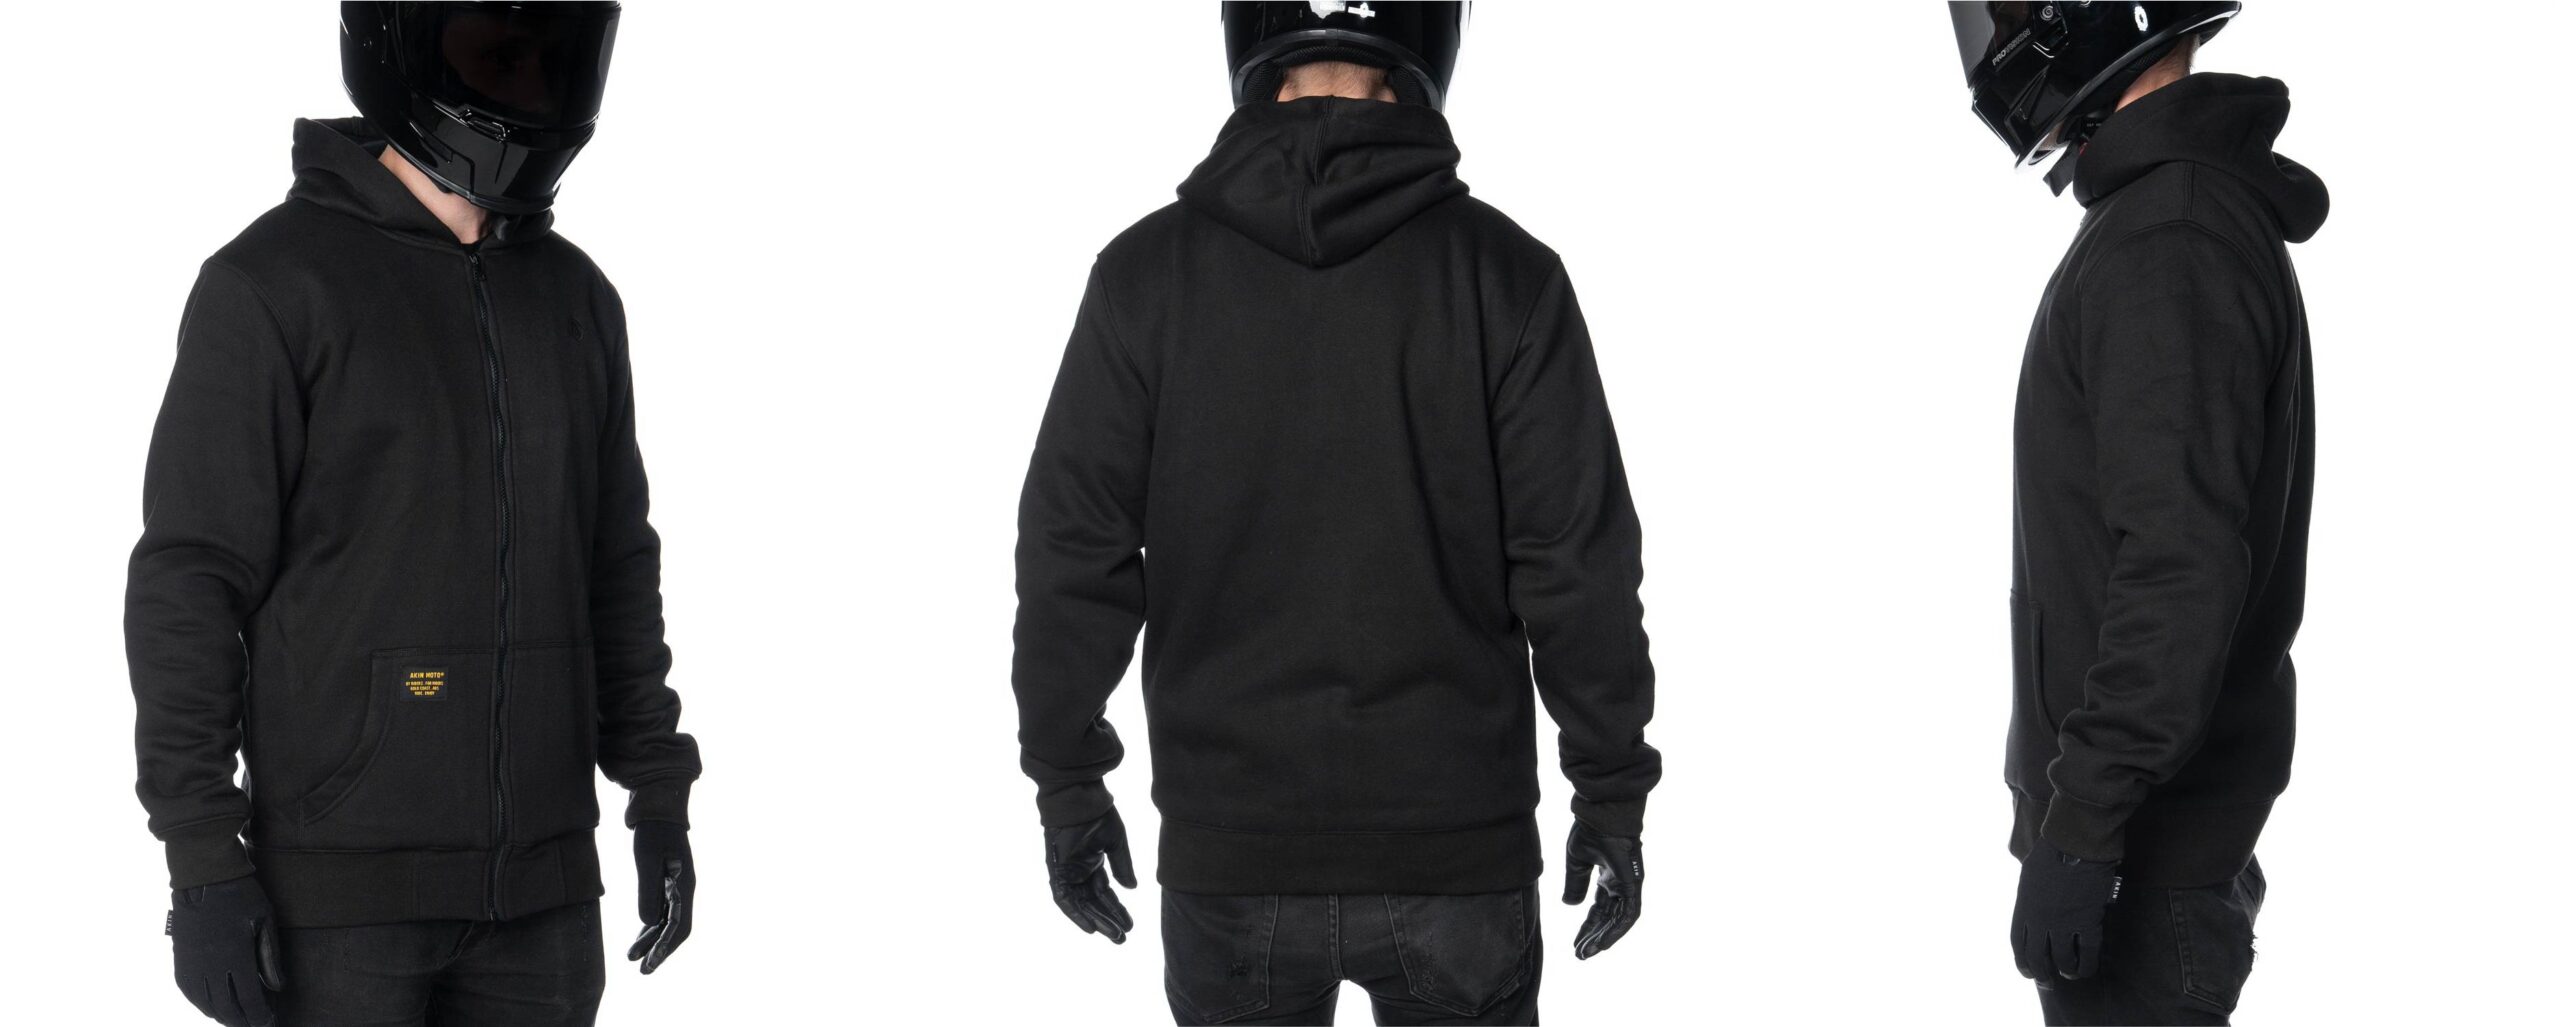 Motorcycle Mens Made With Kevlar Hoodie Full Protective Armoured Lined Hood 